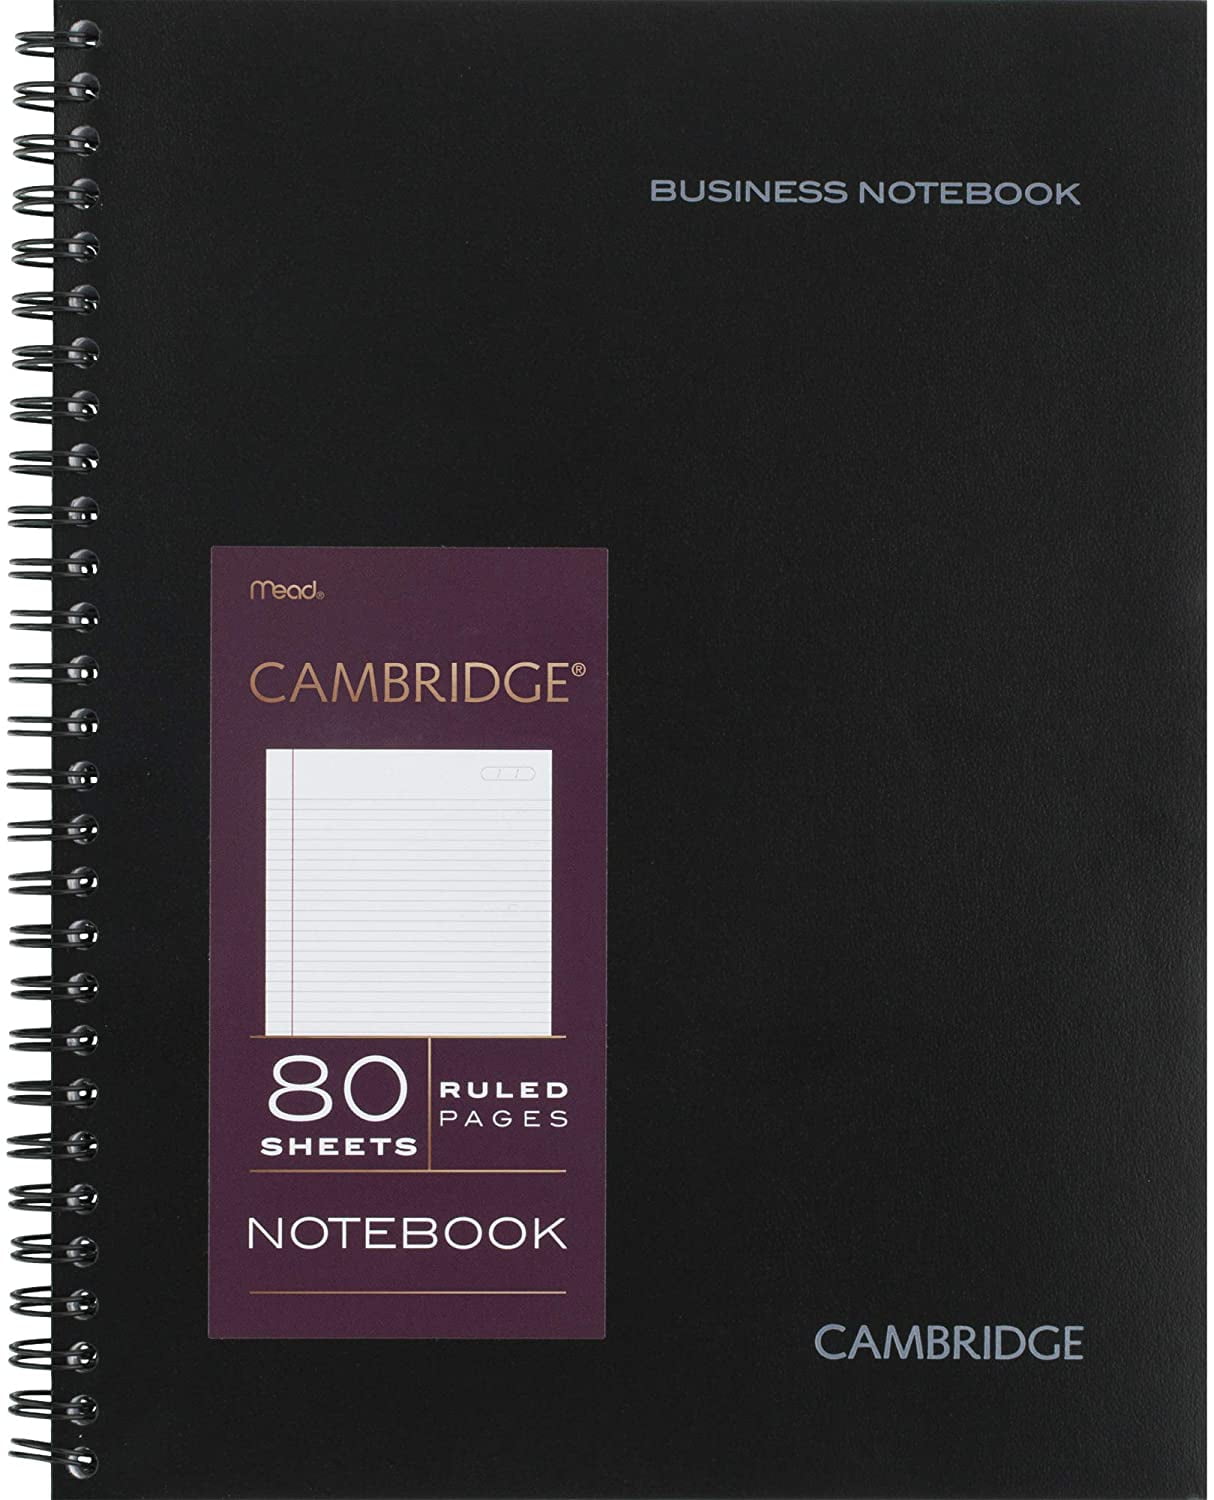 Cambridge Limited Notebook, Single Pack Black Spiral, Legal Ruled